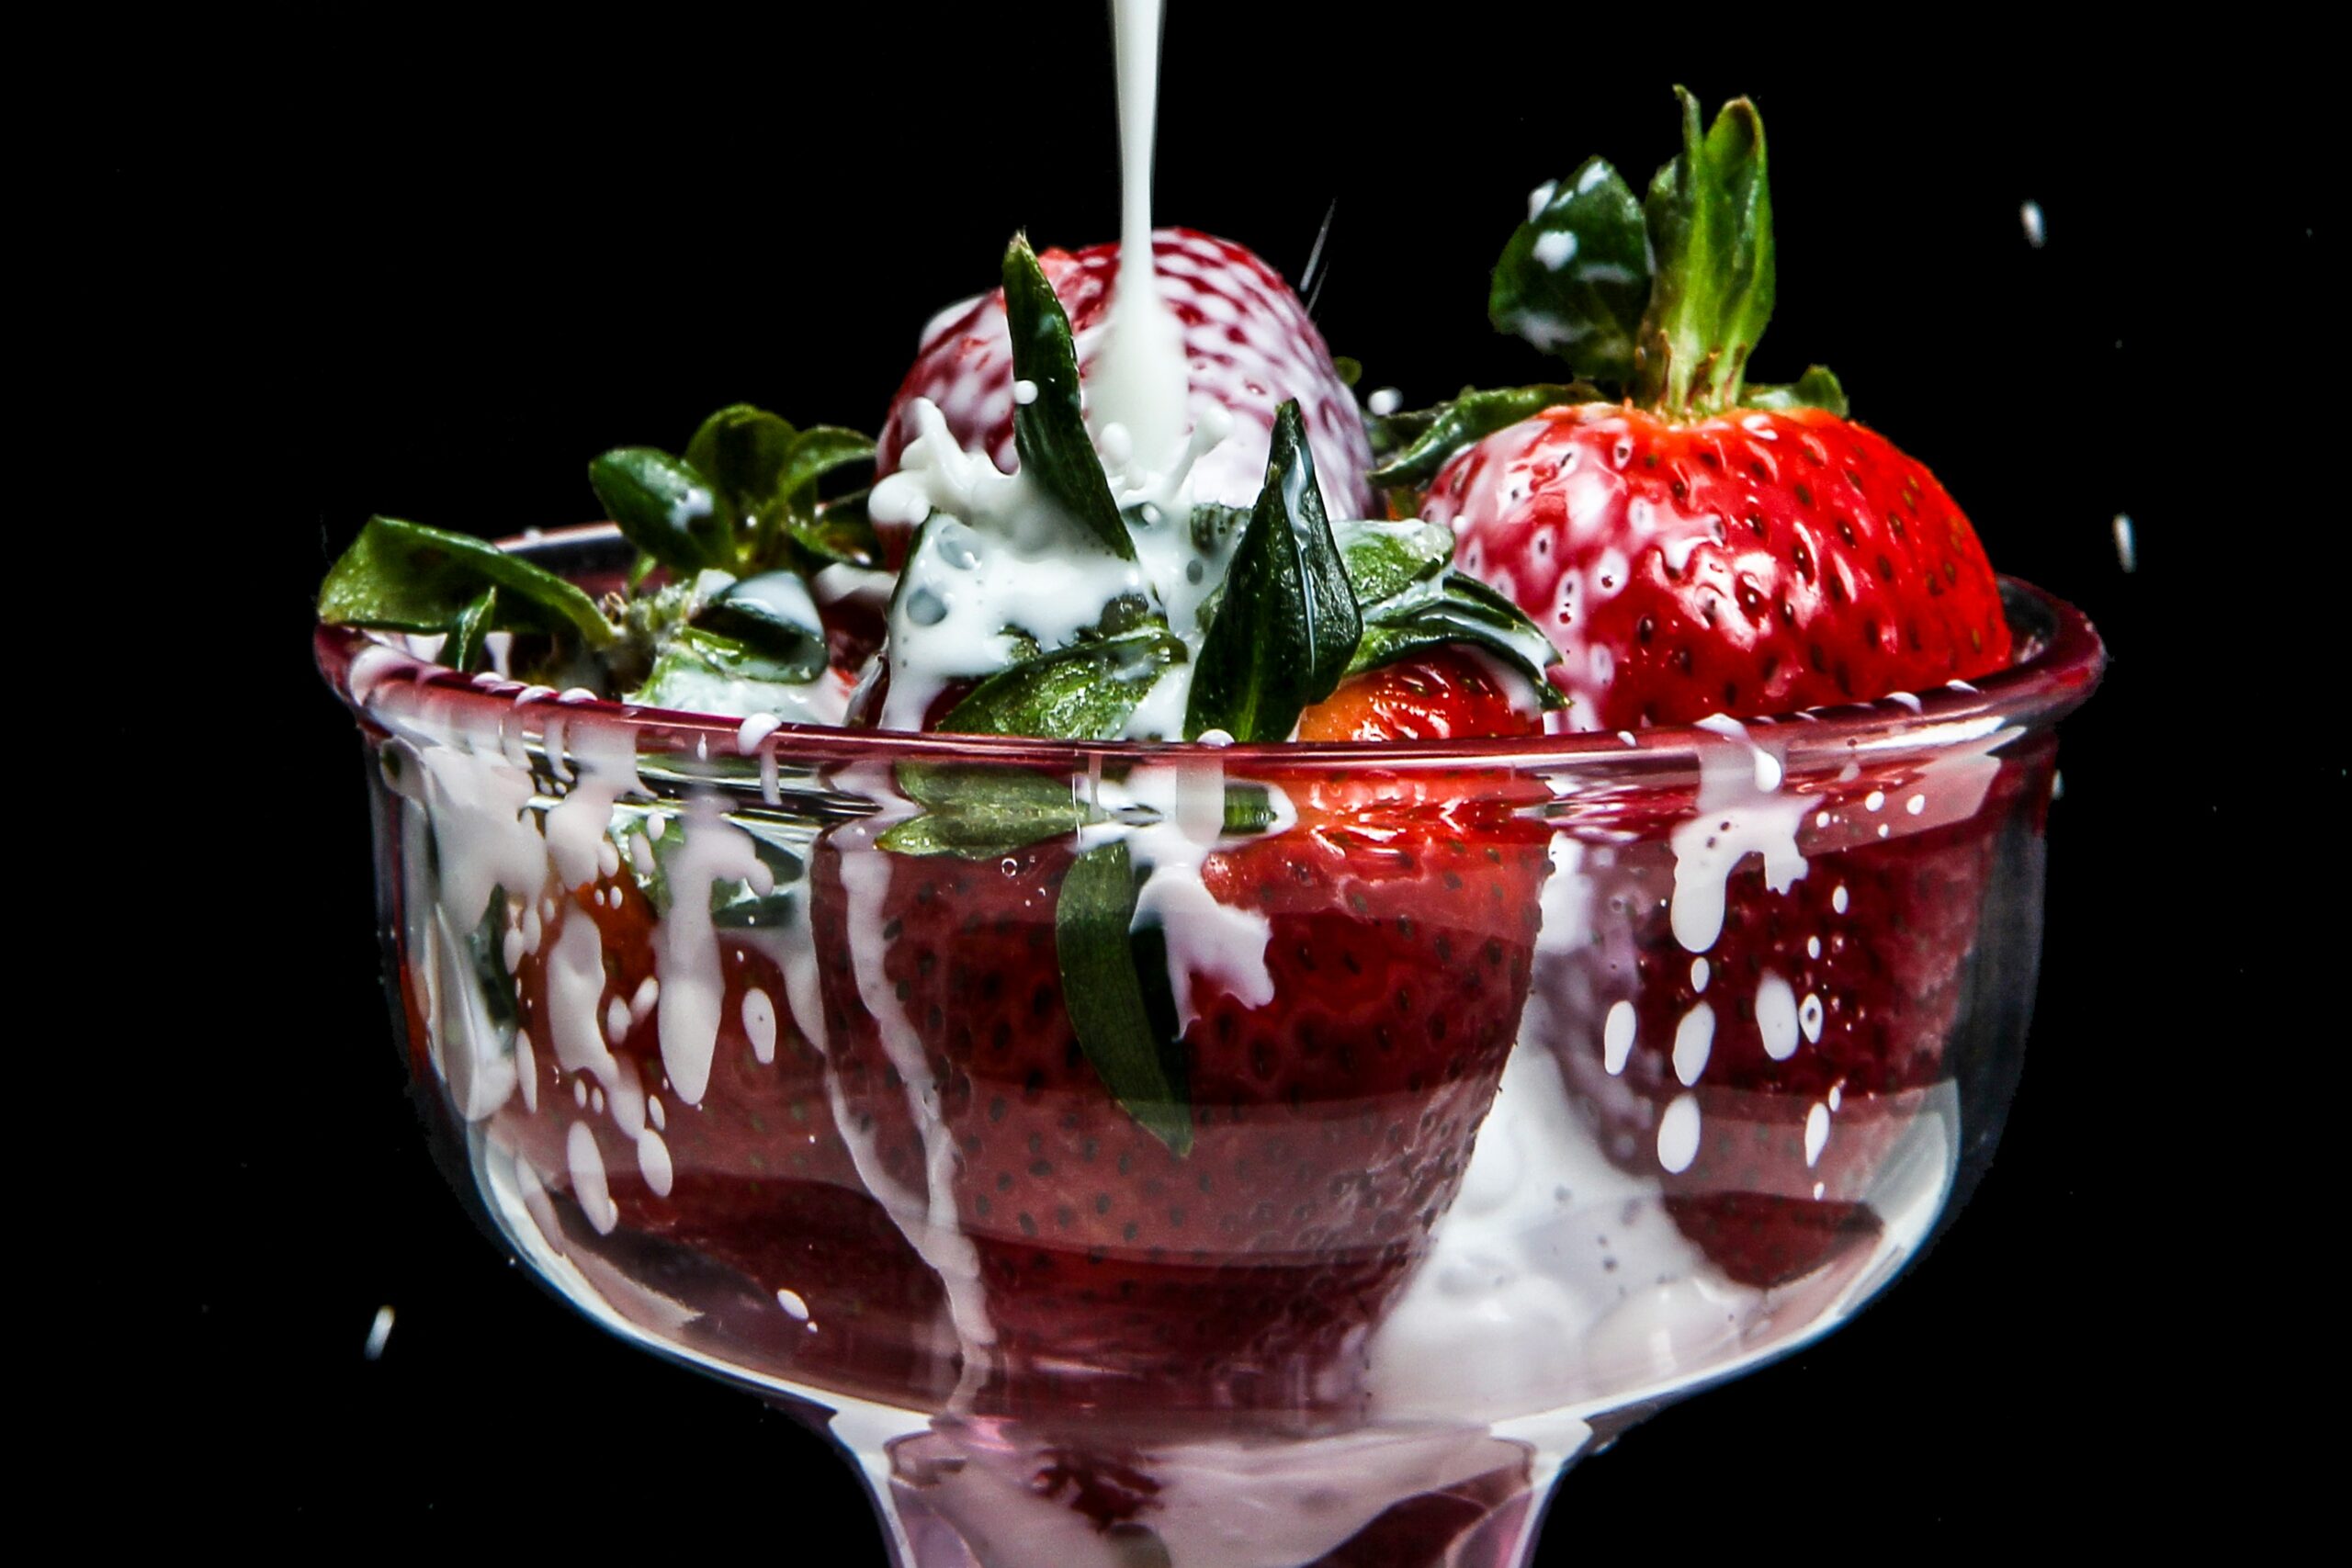 The perfect sweet and fruity balance, a strawberries and cream drink is the perfect Valentine's Day cocktail. Pictured: Strawberries and cream martini